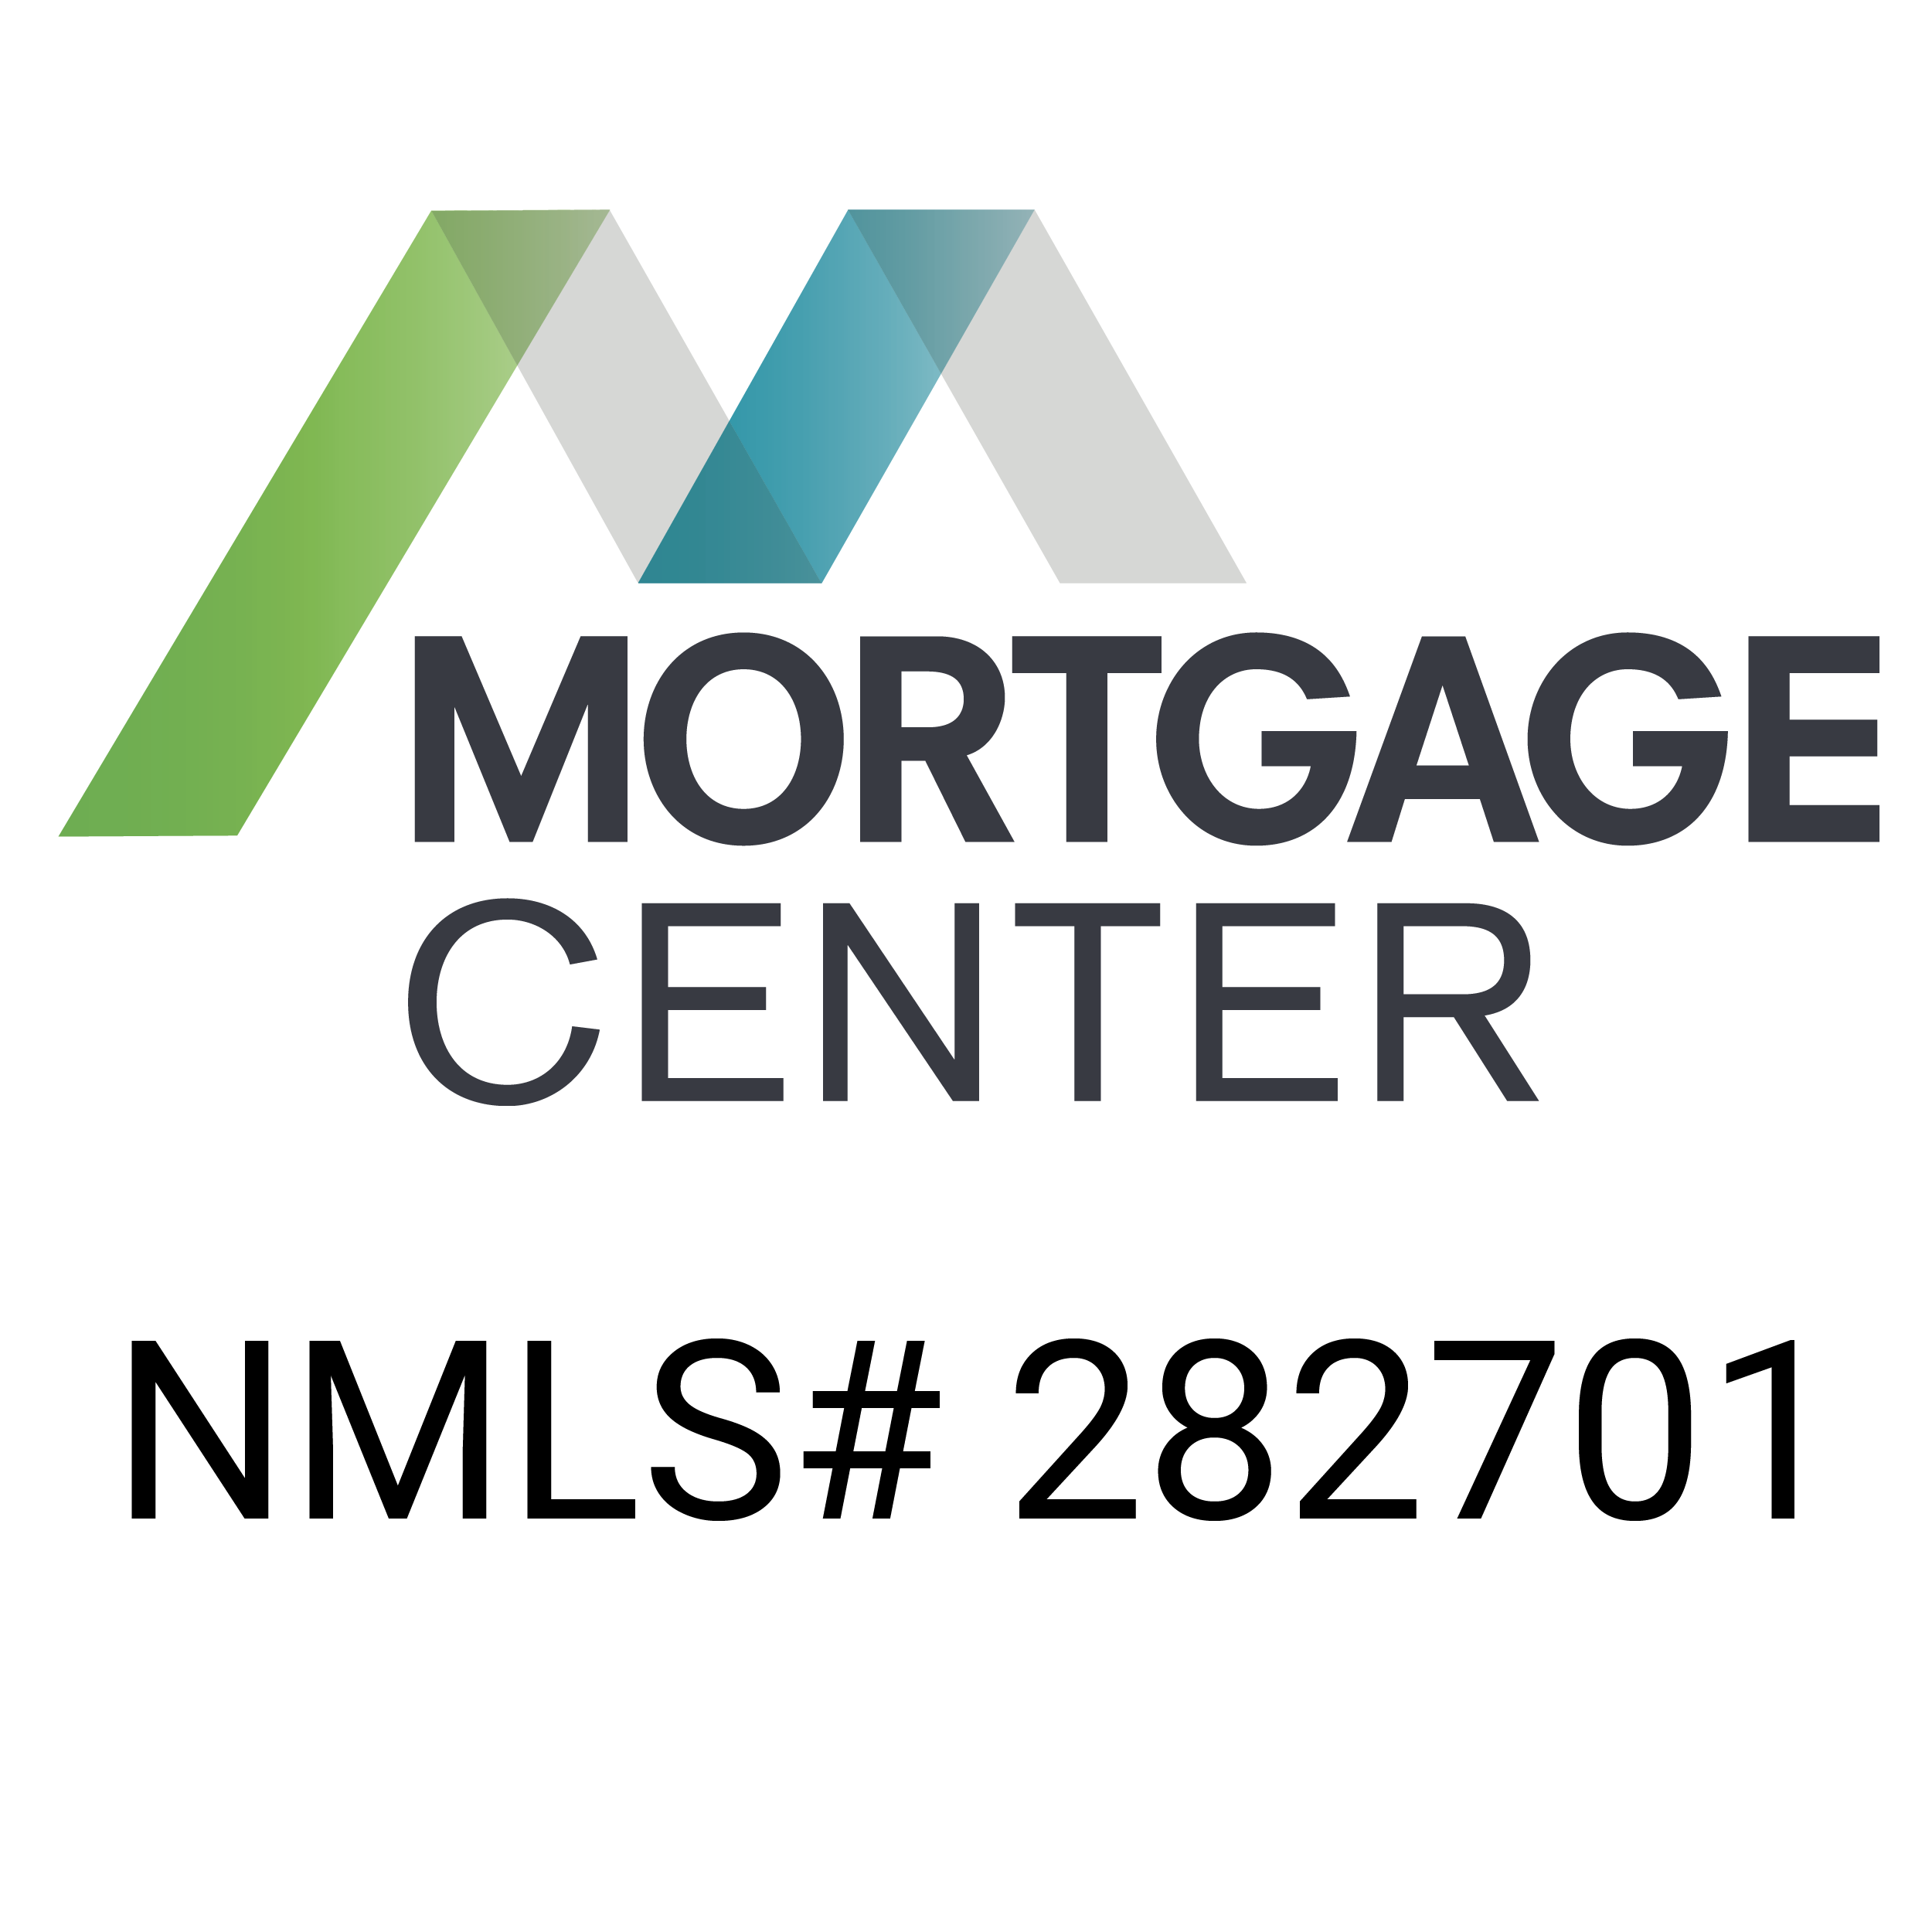 Mortgage Center Logo with NMLS #